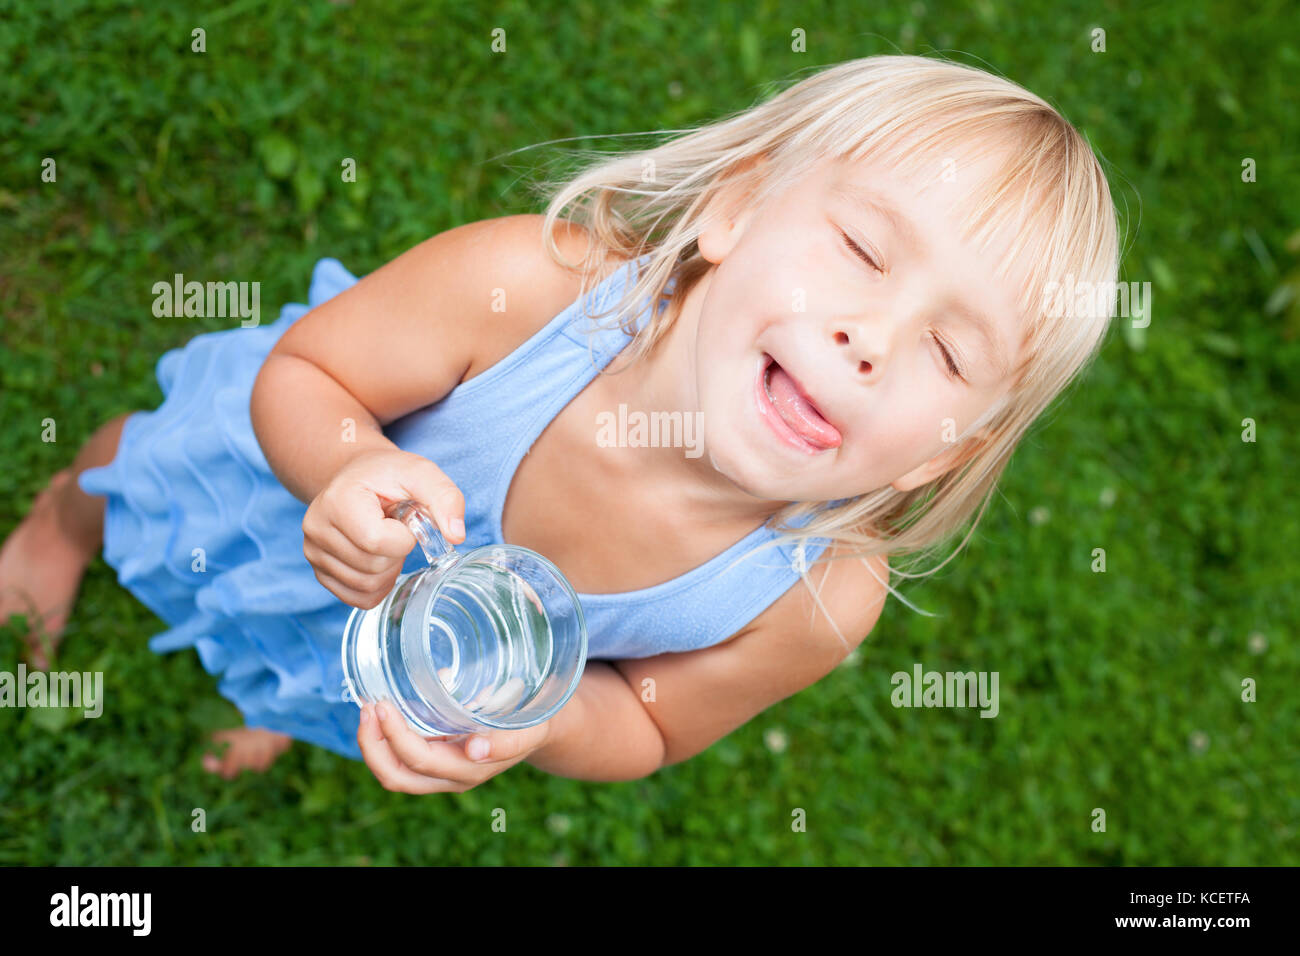 High angle view shot of blonde little girl wearing blue dress holding glass of water licking her lips with her eyes closed in a summer garden Stock Photo